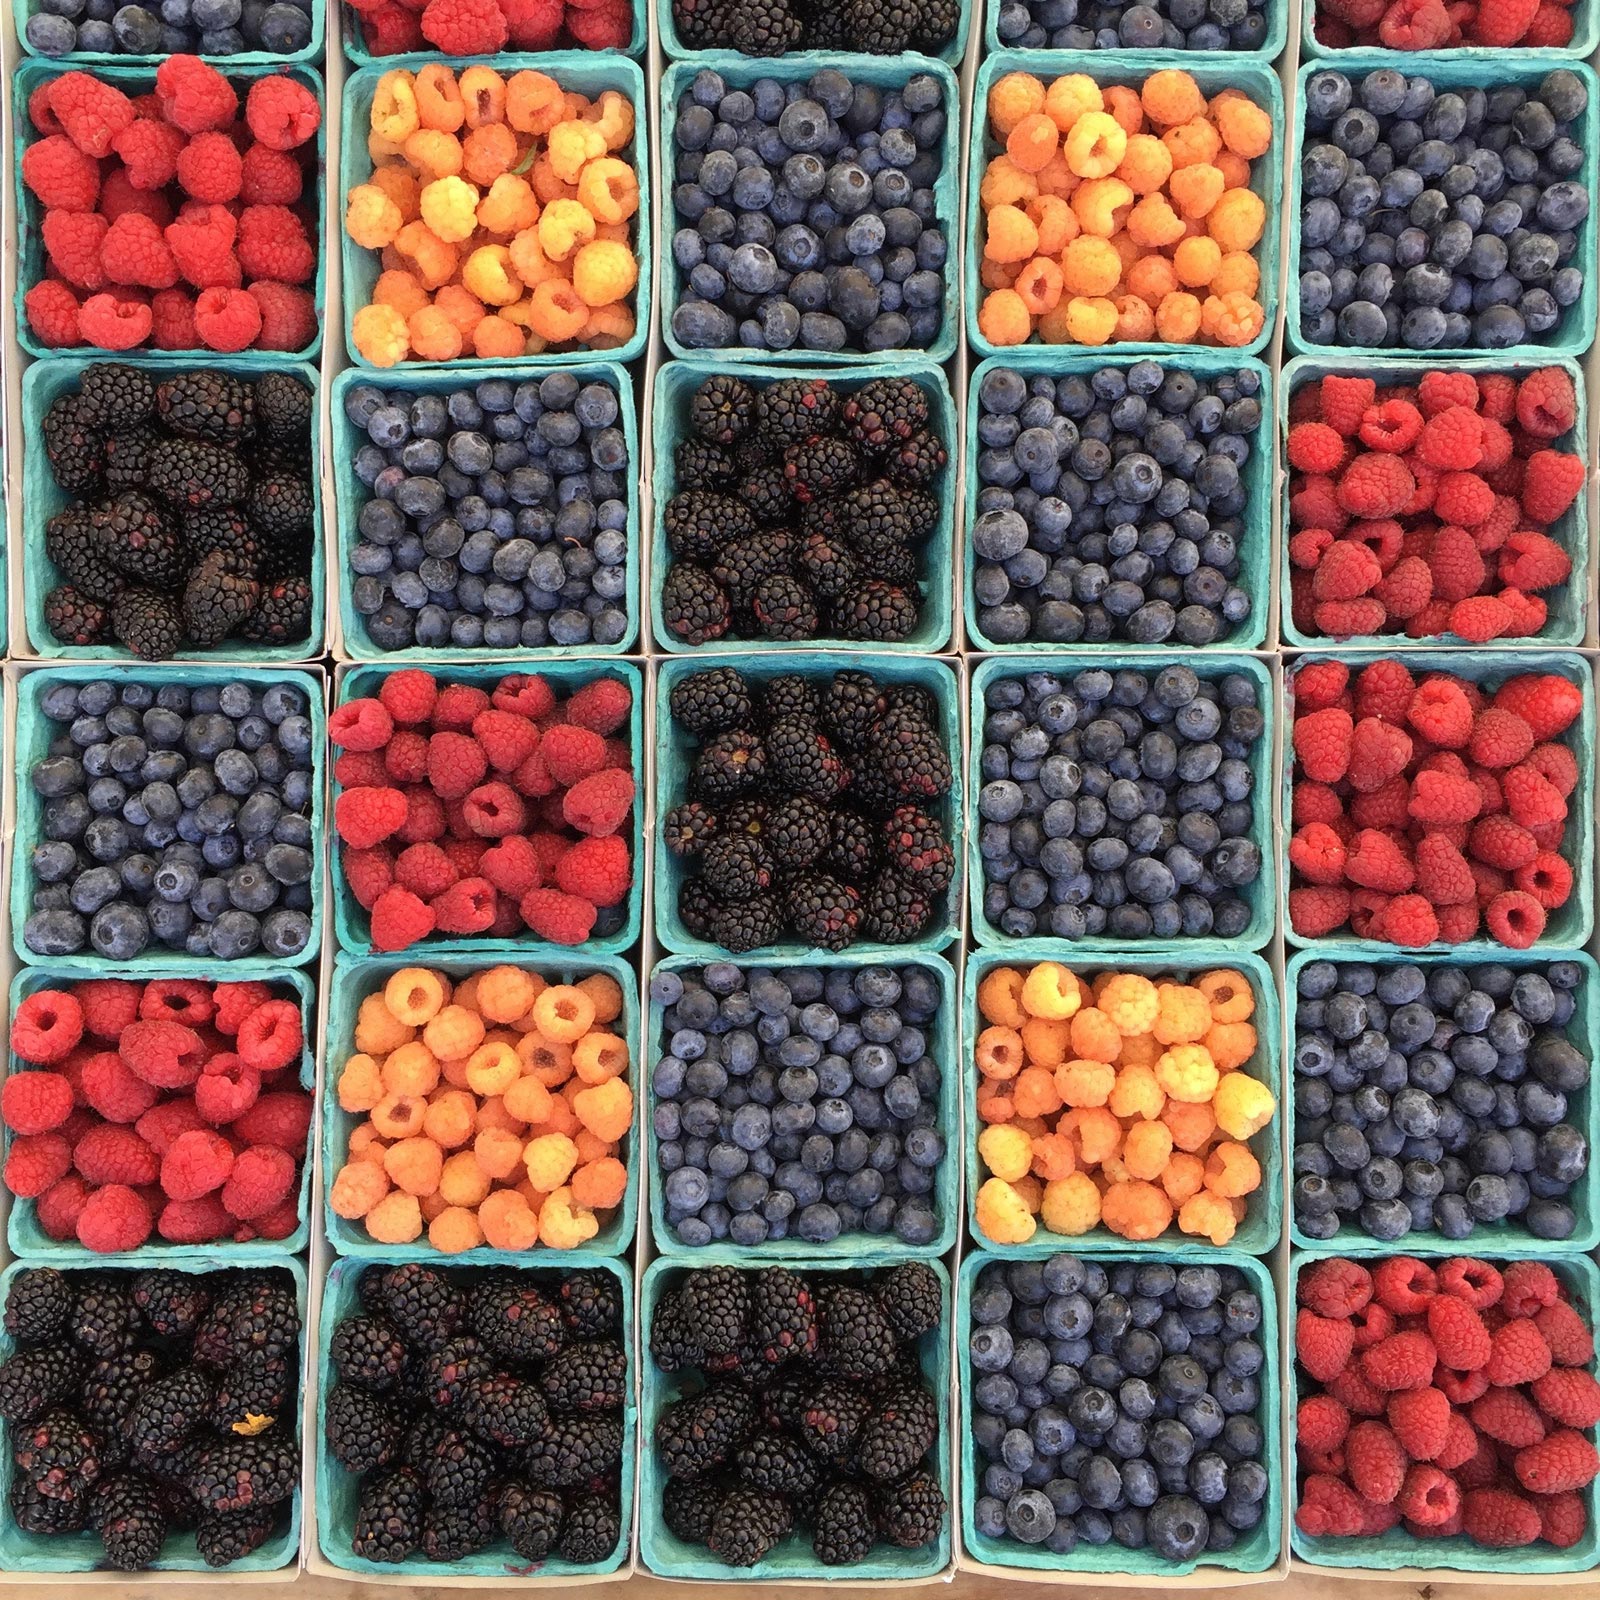 Berries are great for hearing nutrition